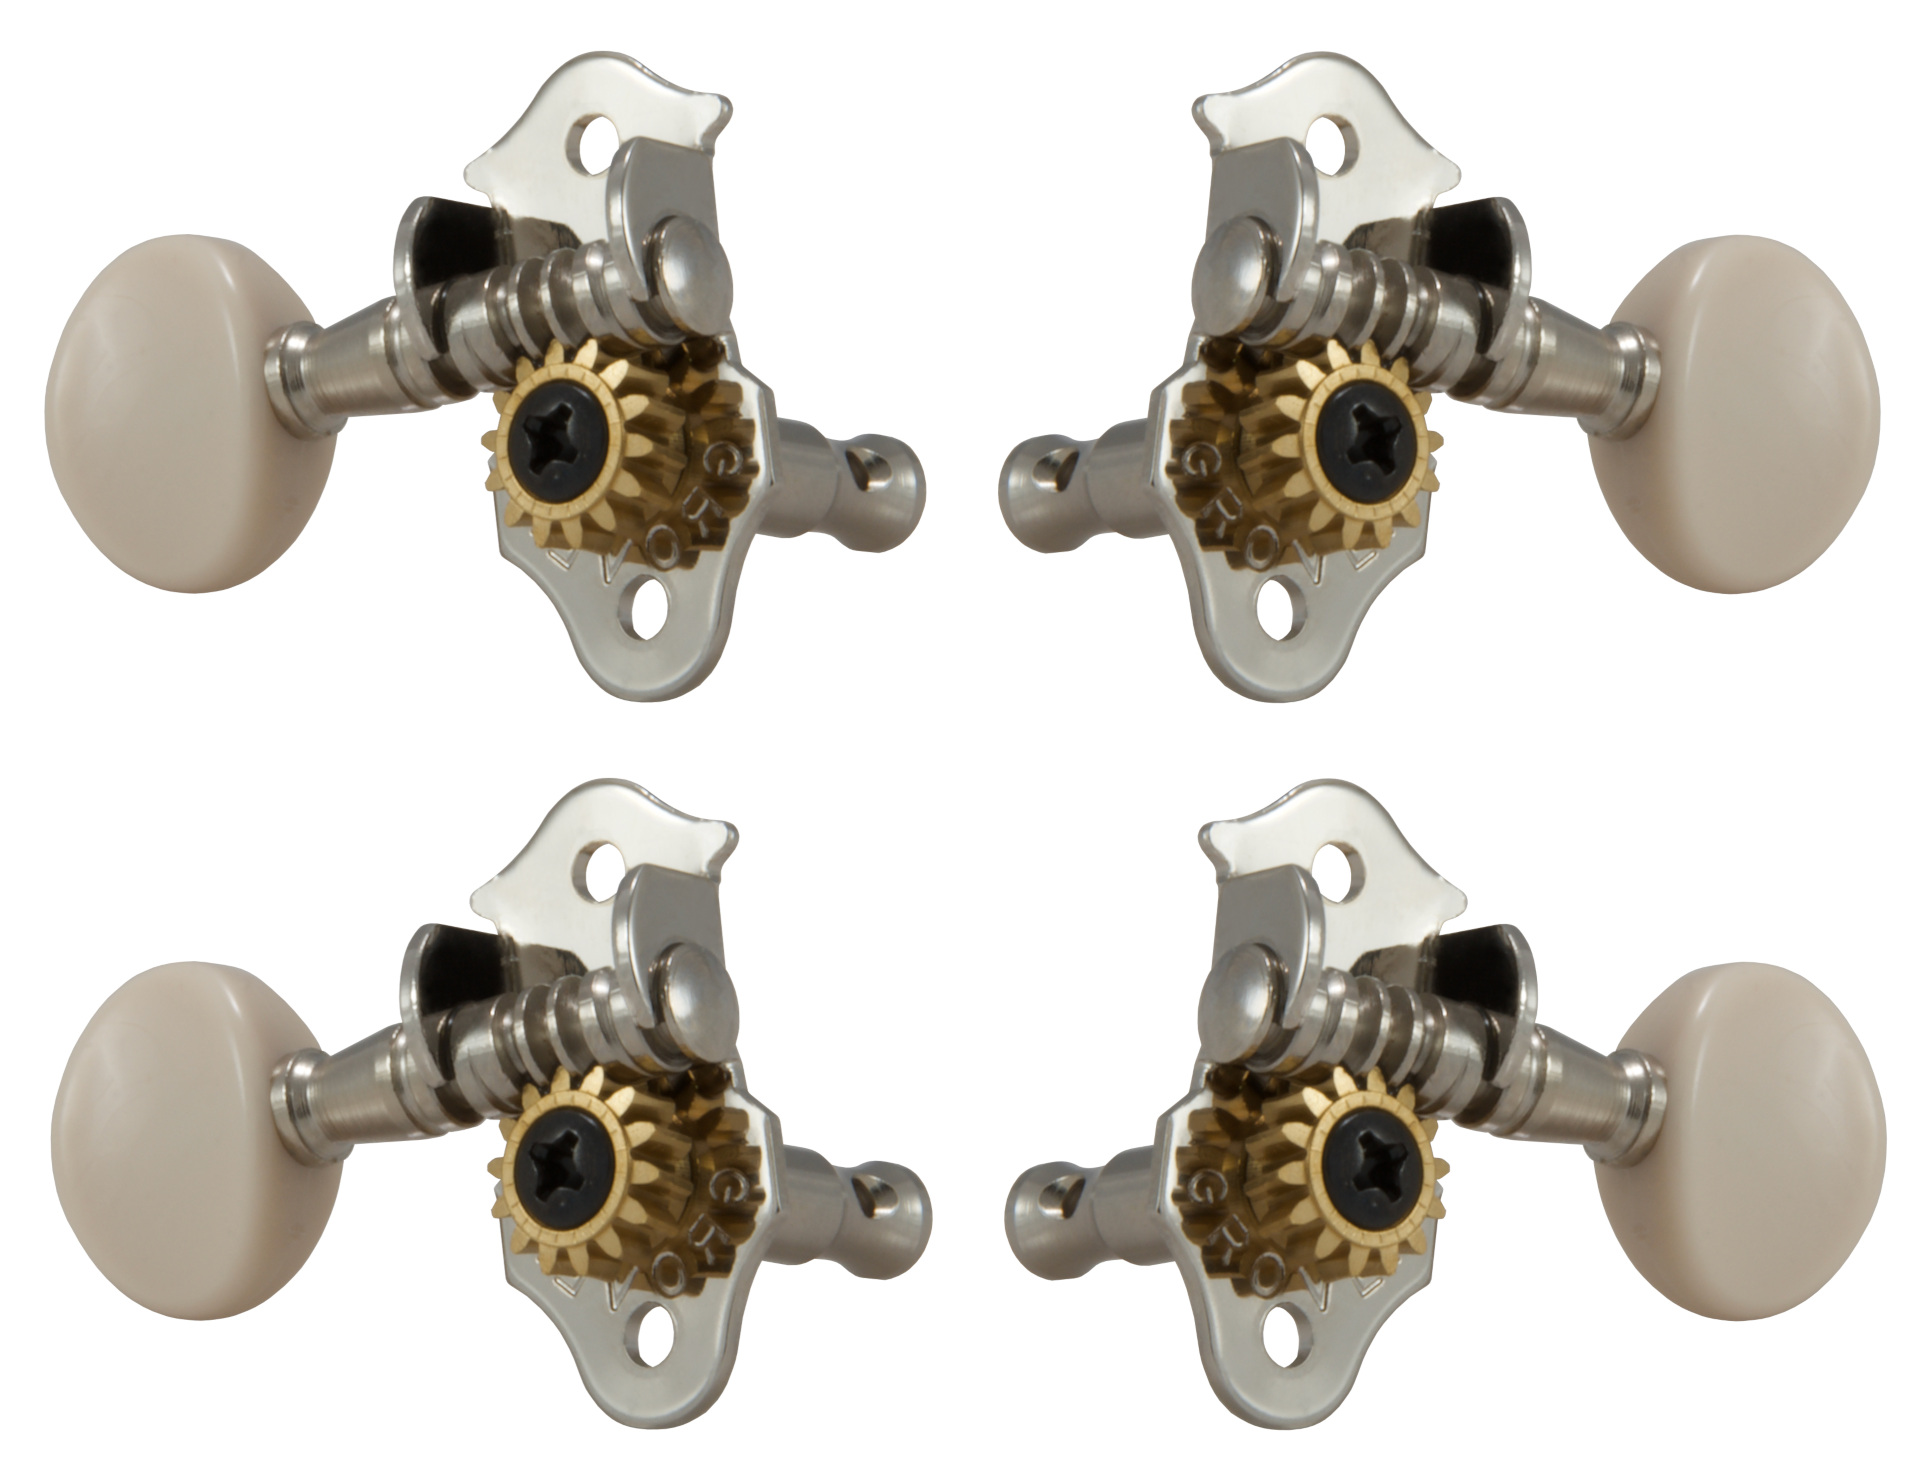 Grover 9NW Sta-Tite Geared Ukulele Pegs with White Button - 4 pcs. - Nickel